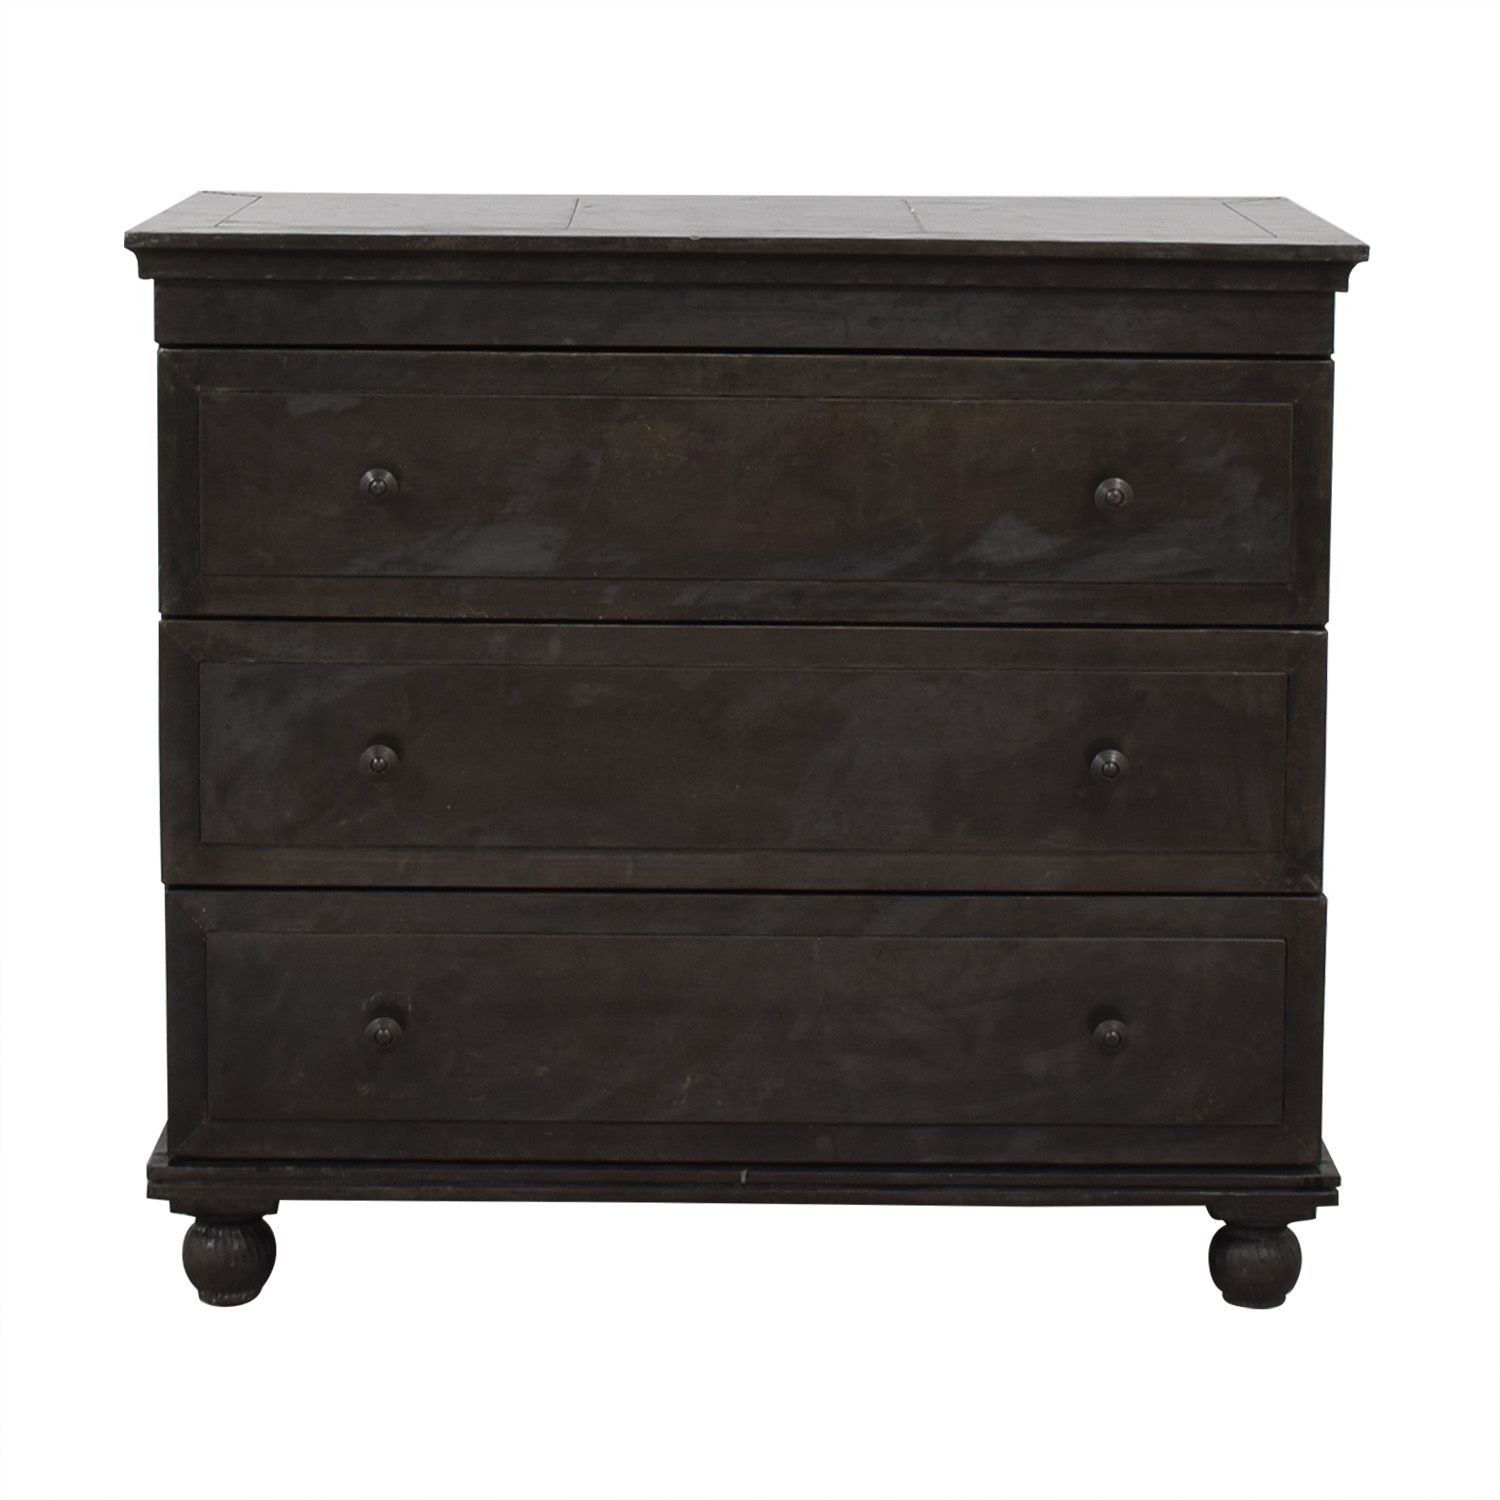 71% Off – Restoration Hardware Restoration Hardware Annecy Dresser / Storage Within Most Recent Annecy Sideboards (Photo 14 of 20)